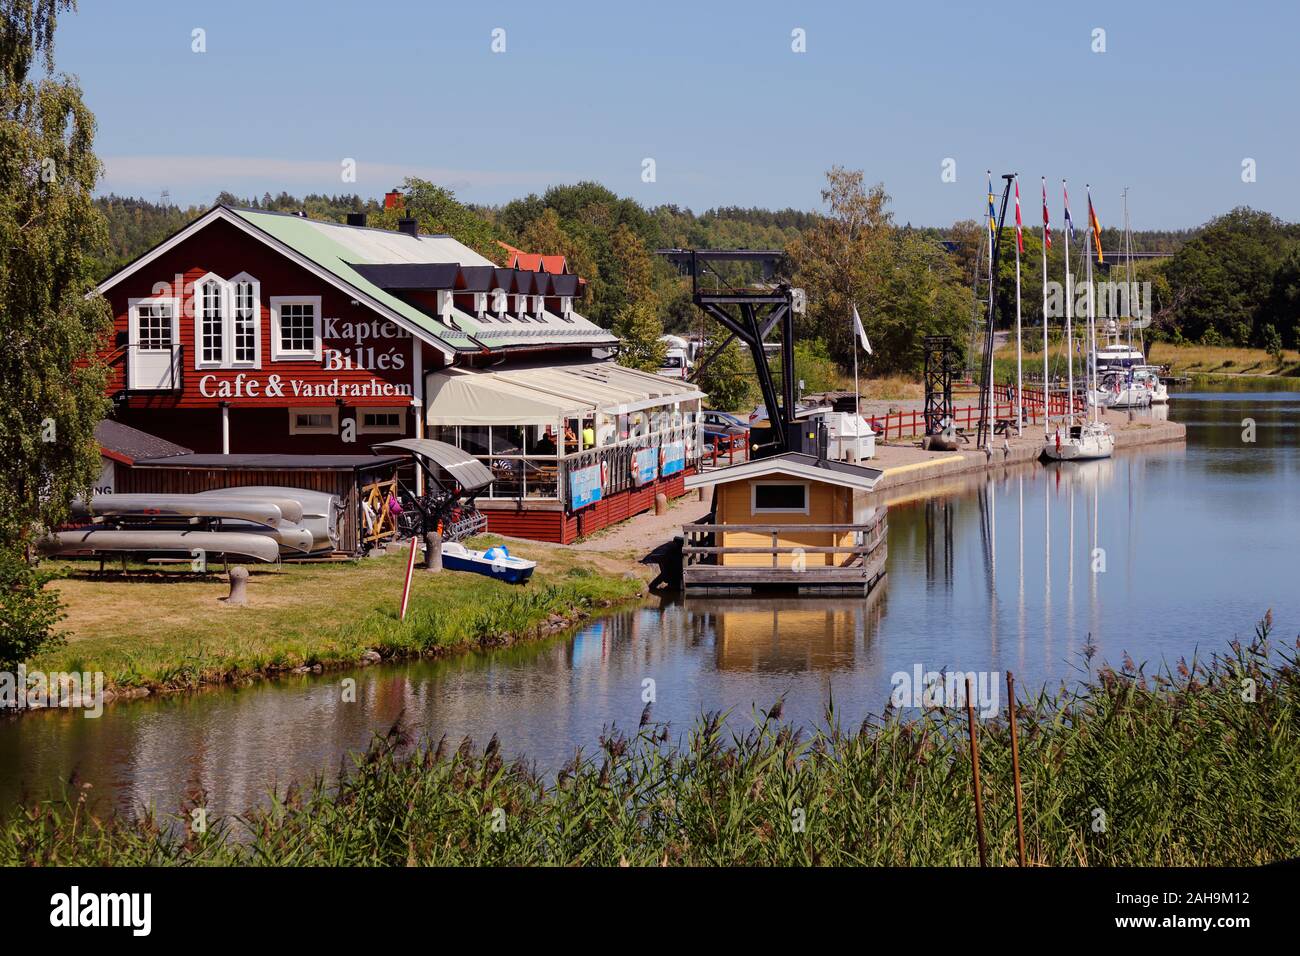 Norsholm, Sweden - July 5, 2018: View of the Kapten Billes uouth hostel and cafe at the Gota canal. Stock Photo